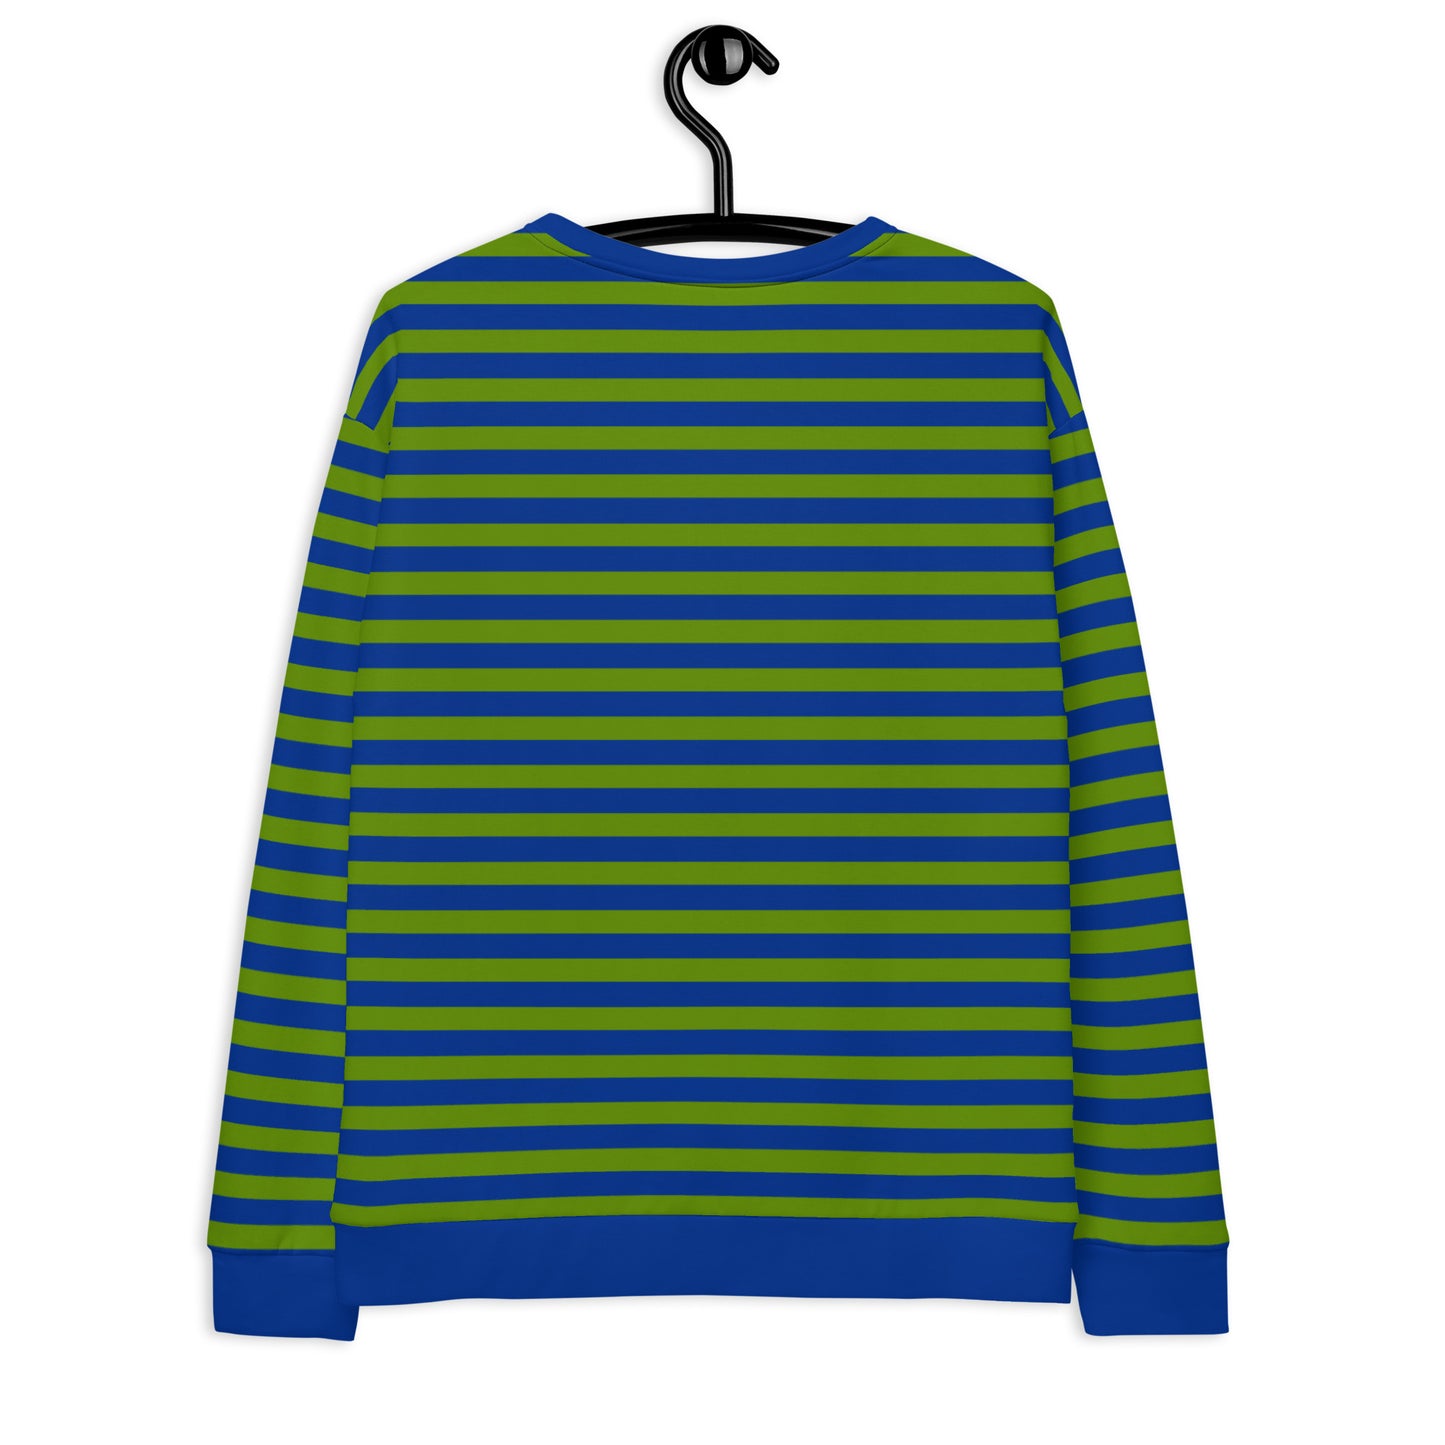 Urban Oasis: Unisex Sweater with Blue and Green Stripes